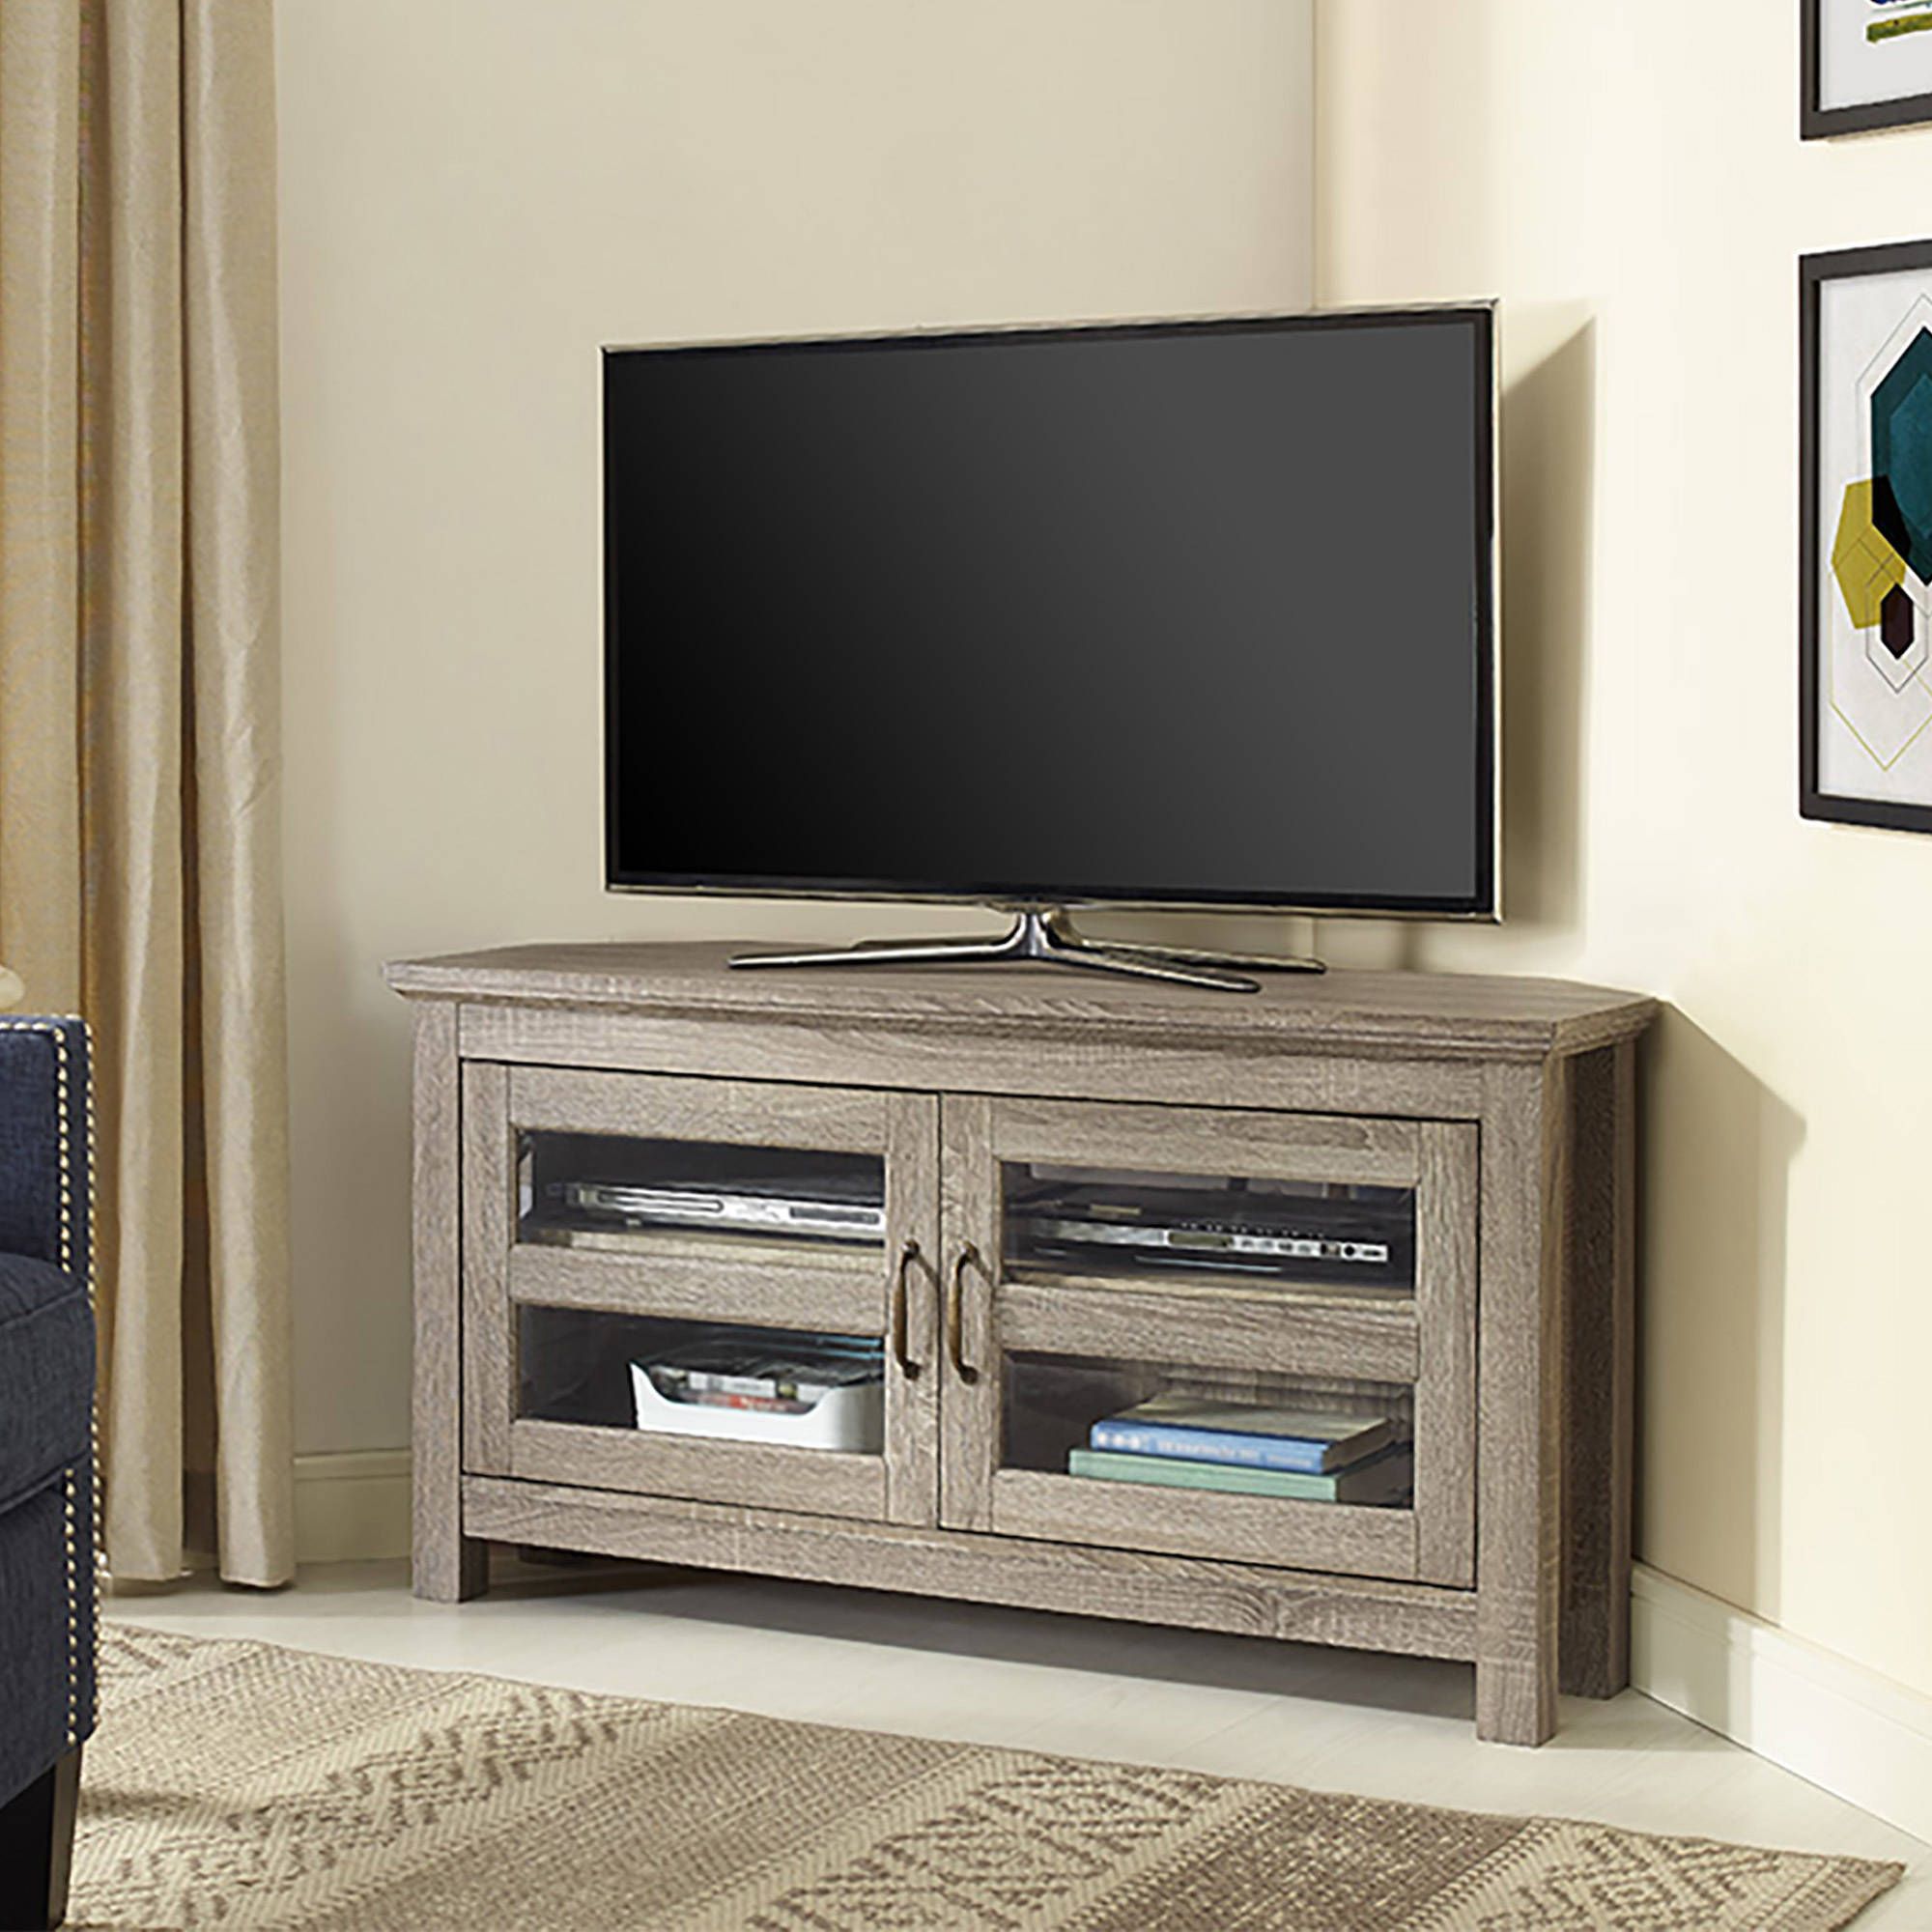 Walker Edison Black Corner Tv Stand For Tvs Up To 48 In Contemporary Black Tv Stands Corner Glass Shelf (View 9 of 15)